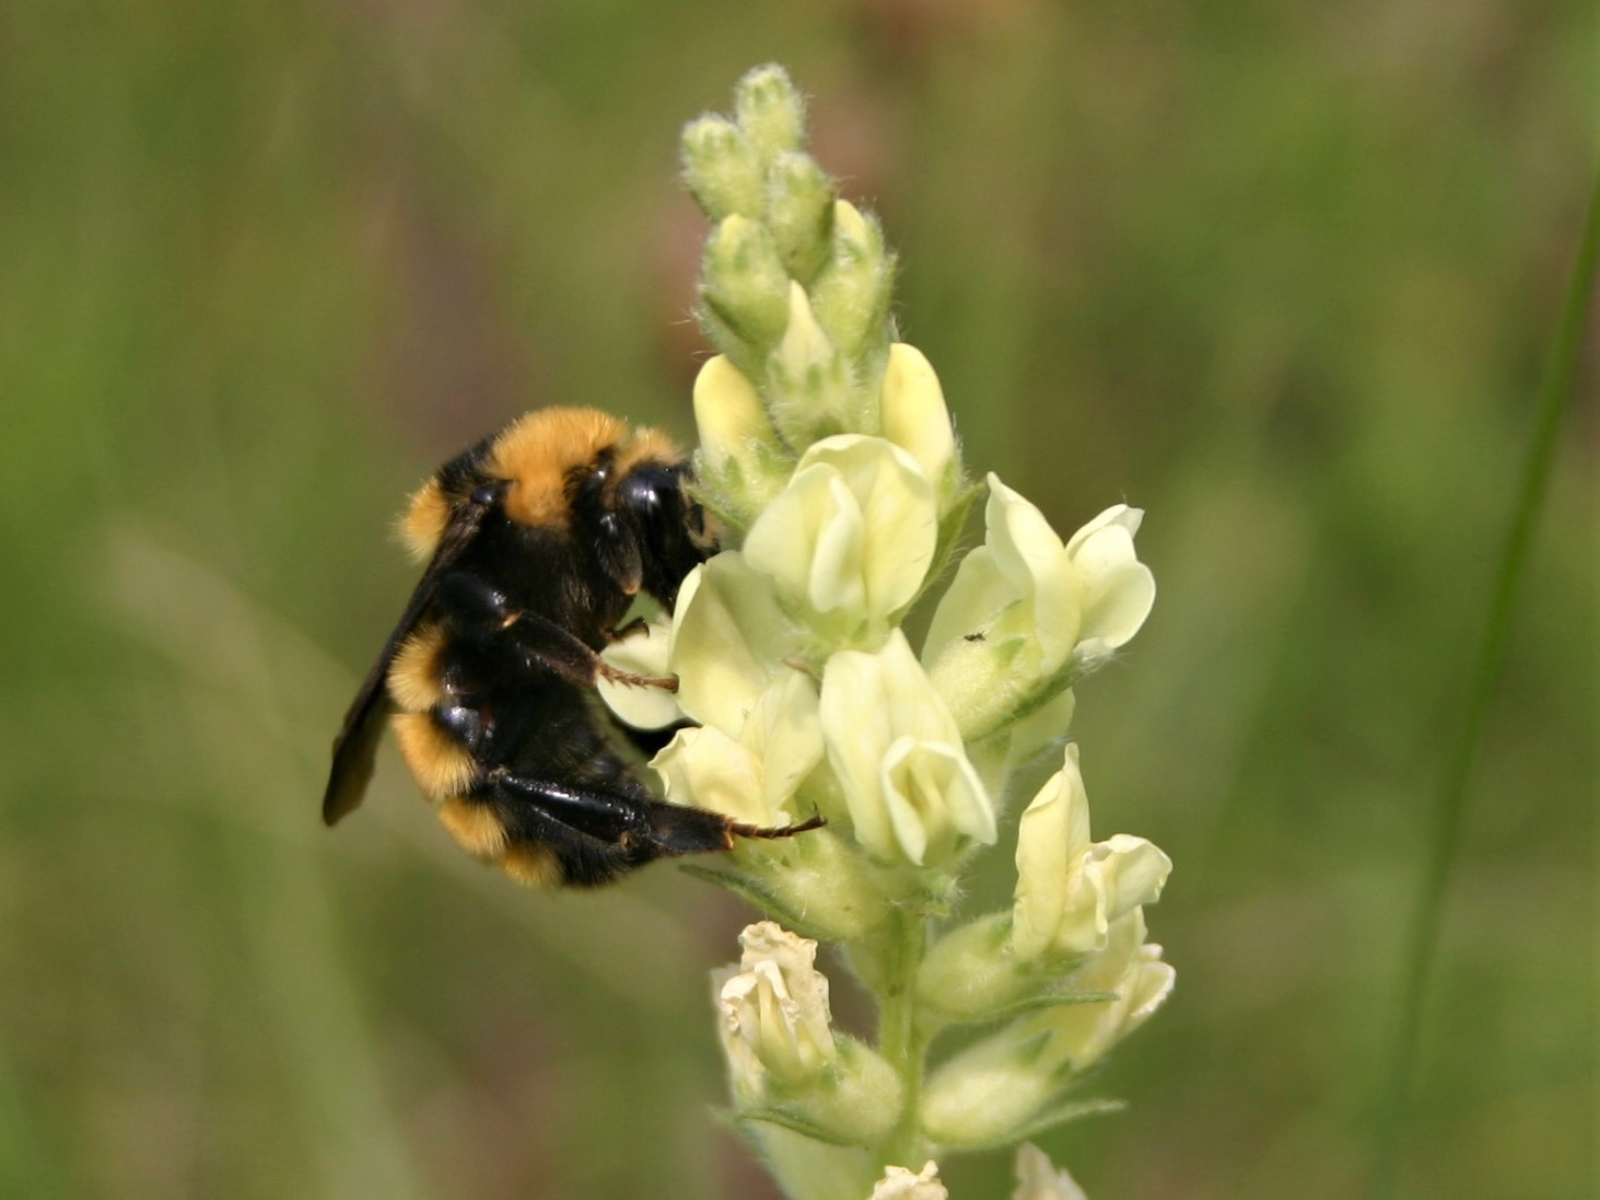 A bumblebee perched on a cluster of white-green tubular-shaped flowers.